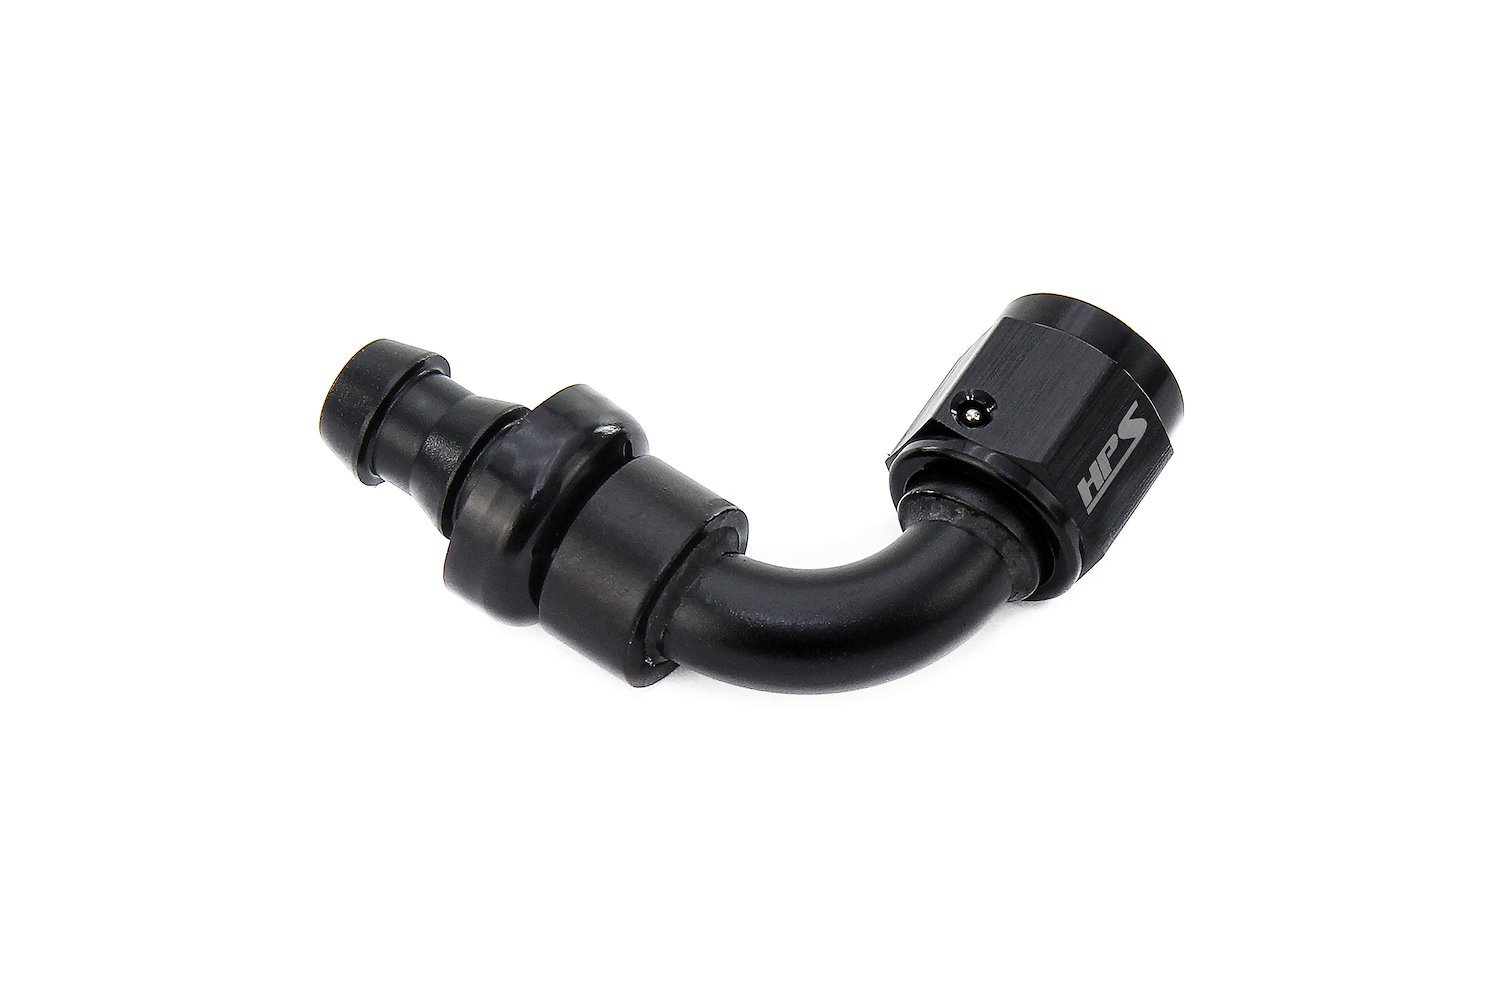 150-9004 150 Series 90-Deg Hose End, Tool-Free Assembly Hose Ends, For Push-On Style Hoses, Easy To Use